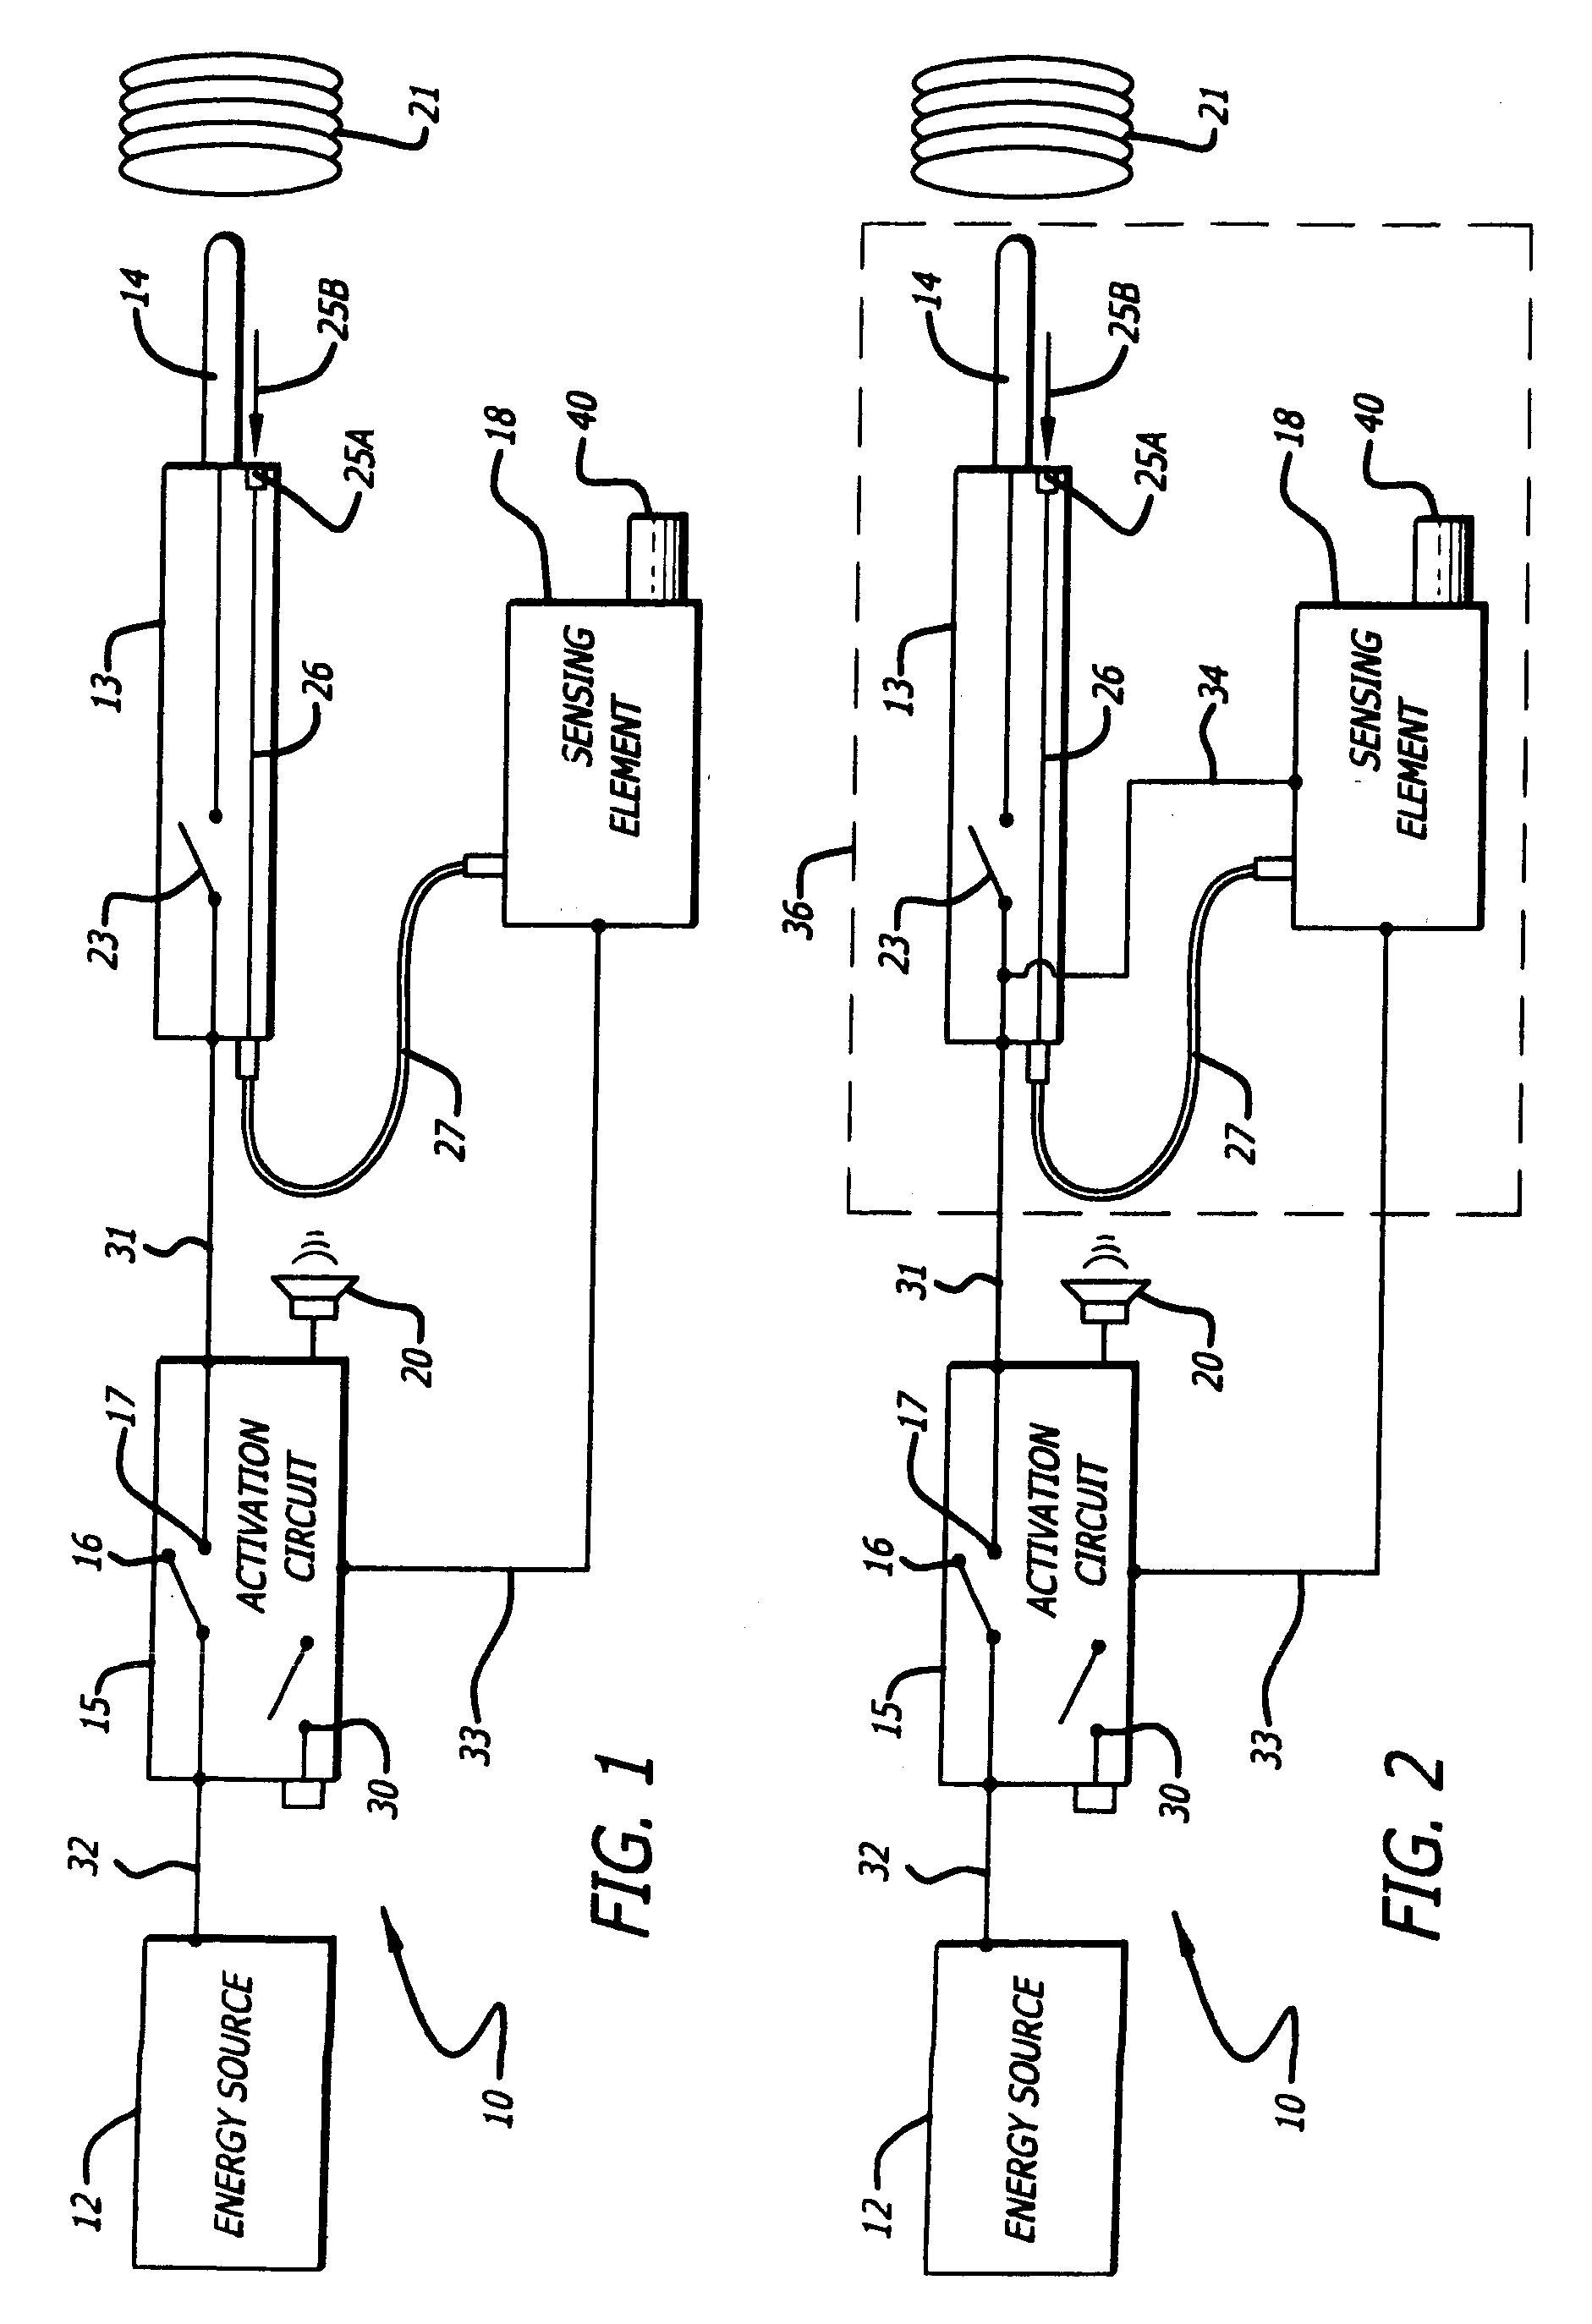 Flammable substance sensing during a surgical procedure